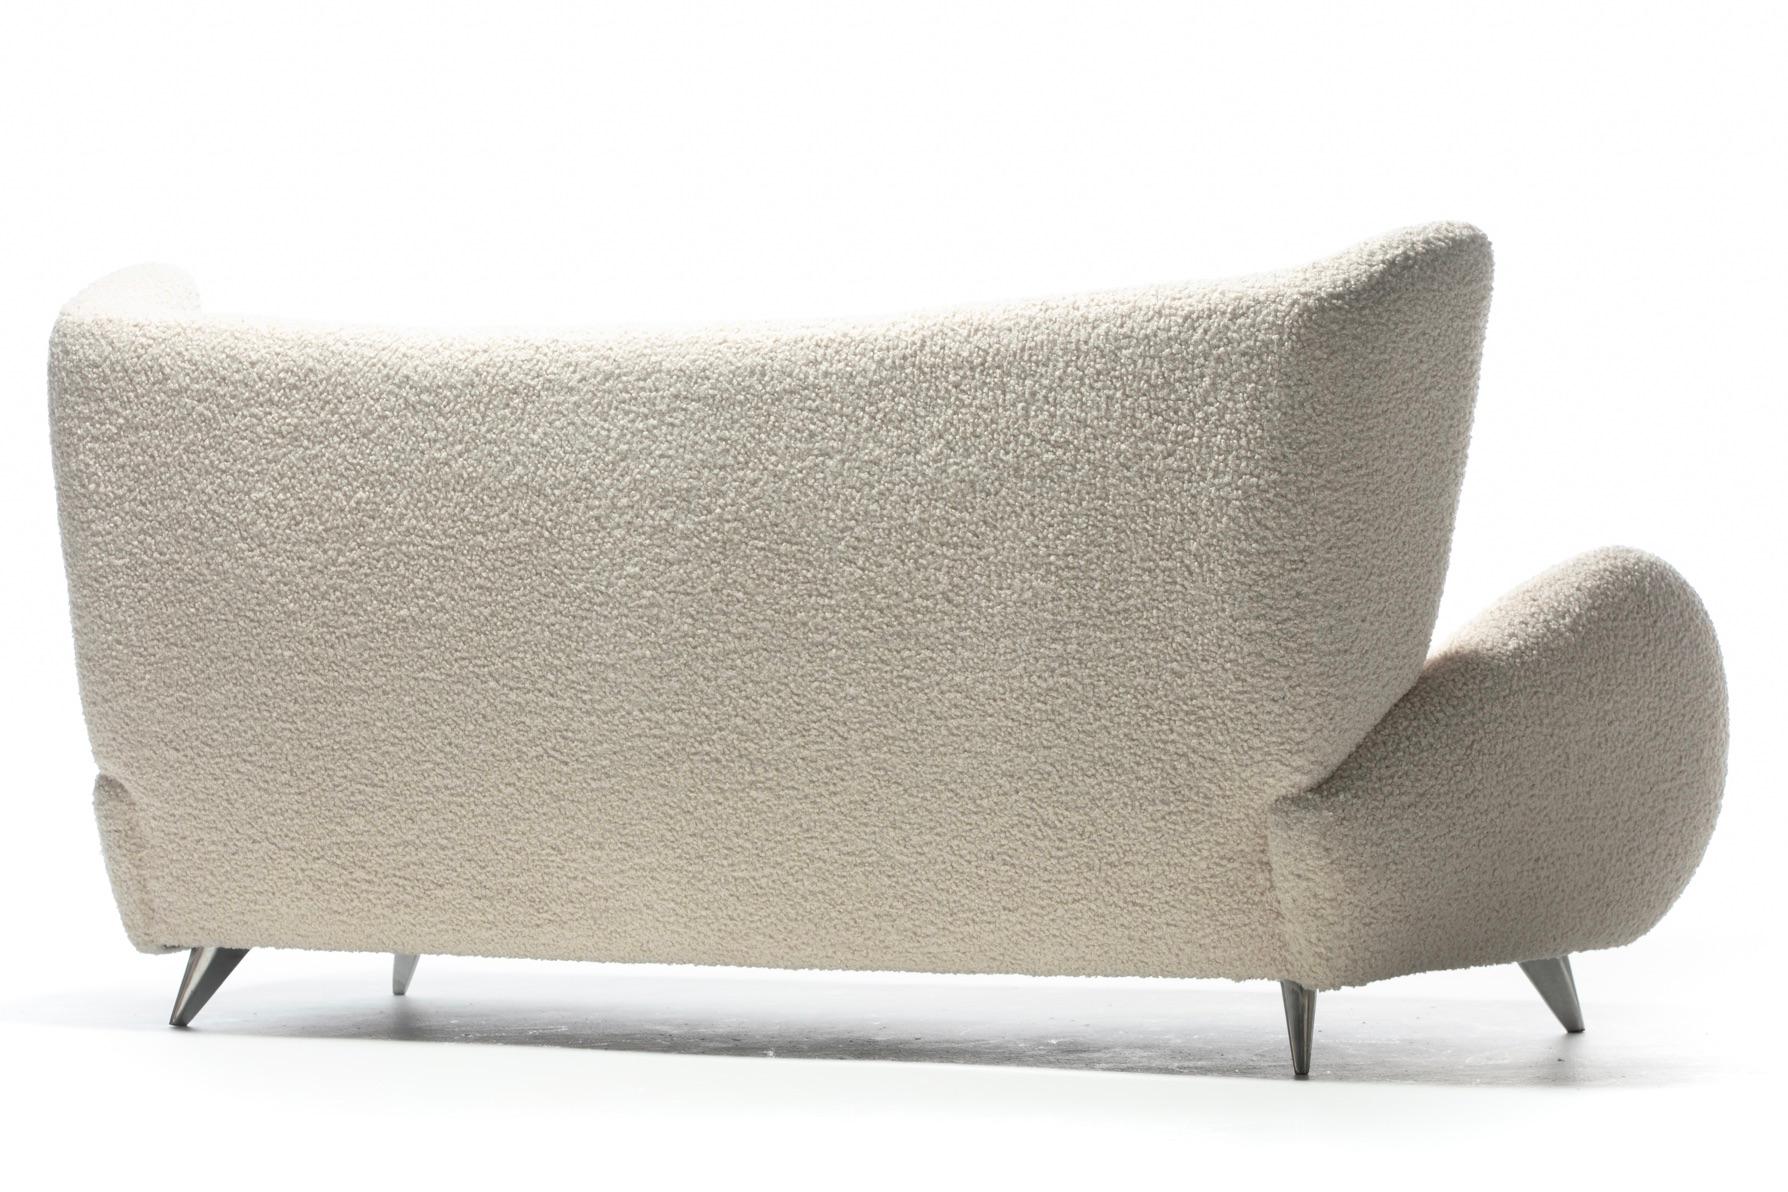 American Vladimir Kagan Fiftyish Sofa in Super Soft Ivory White Bouclé For Sale